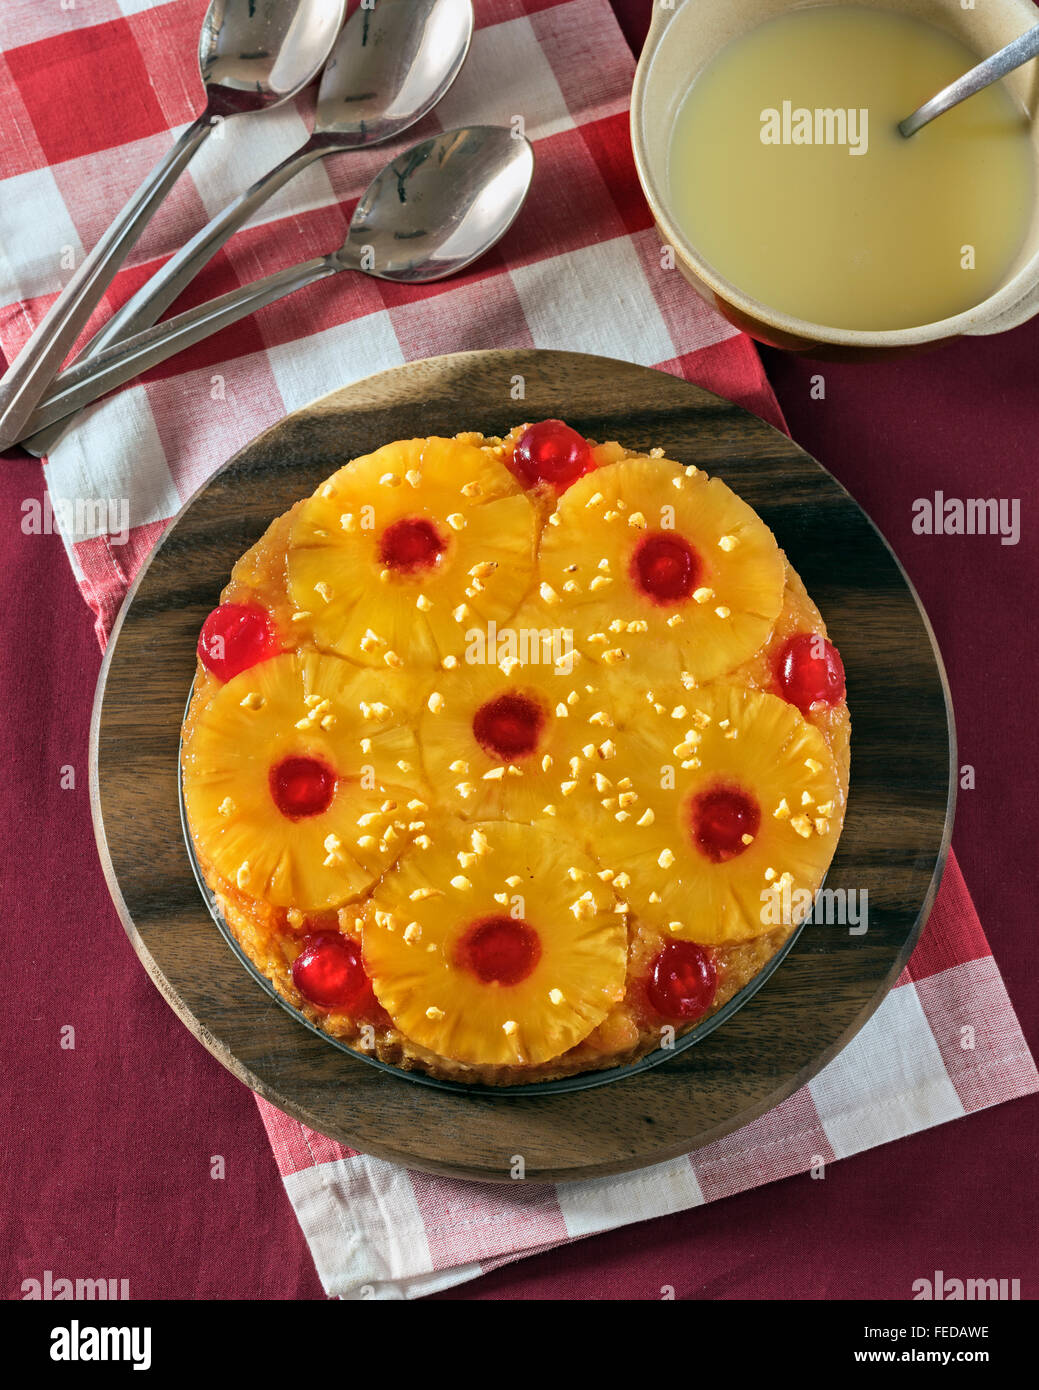 Pineapple upside down cake Banque D'Images